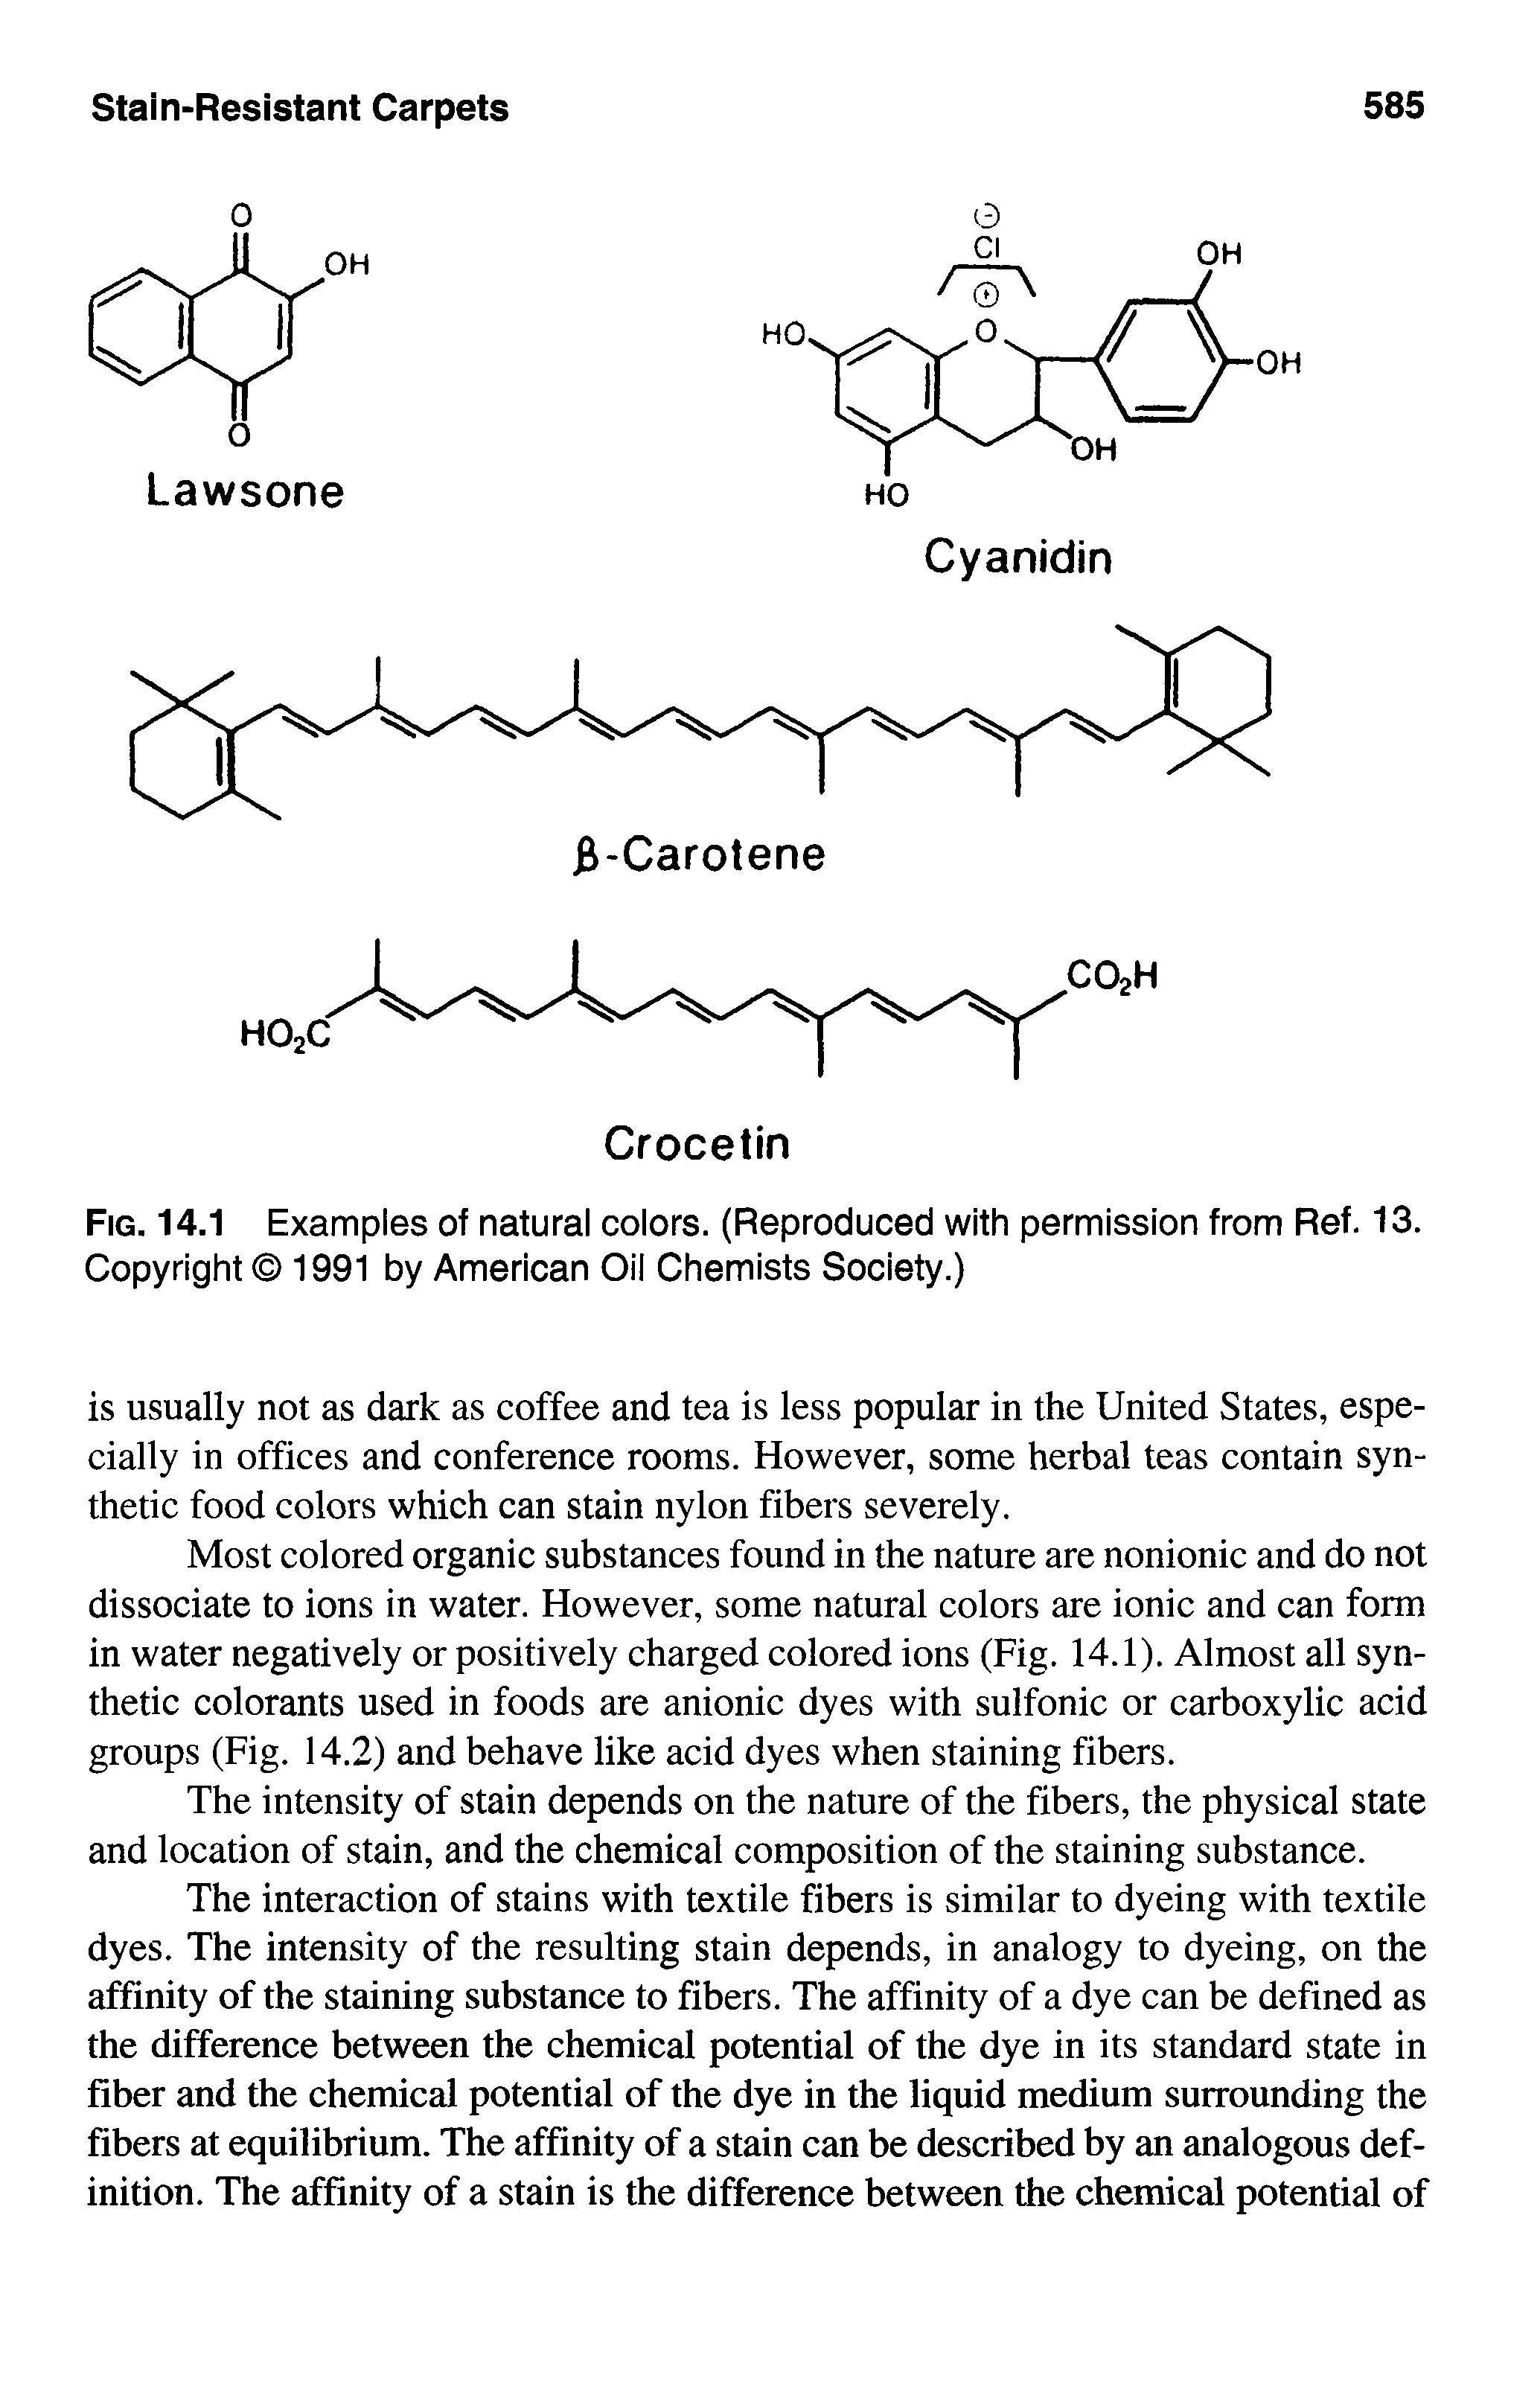 Fig. 14.1 Examples of natural colors. (Reproduced with permission from Ref. 13. Copyright 1991 by American Oil Chemists Society.)...